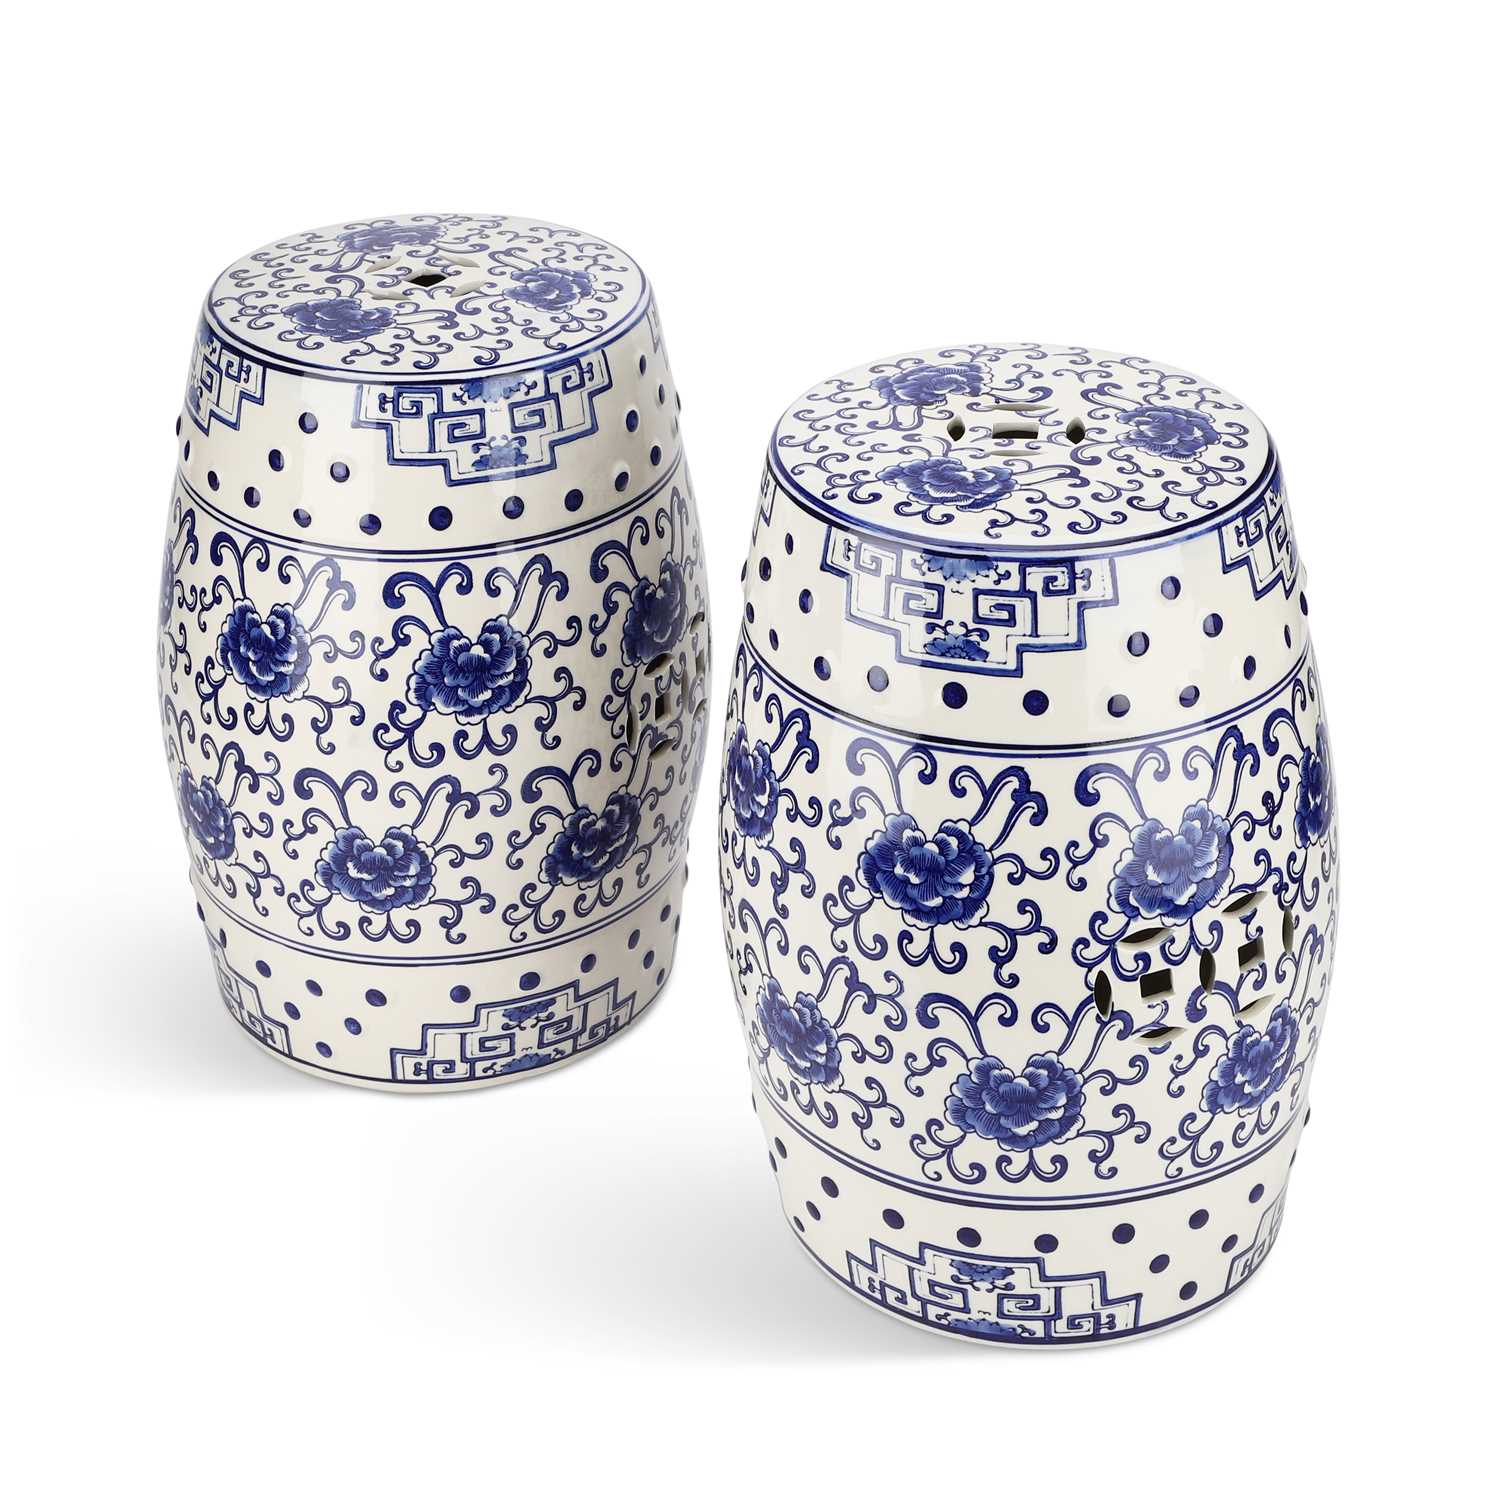 A PAIR OF BLUE AND WHITE POTTERY GARDEN SEATS IN THE CHINESE TASTE